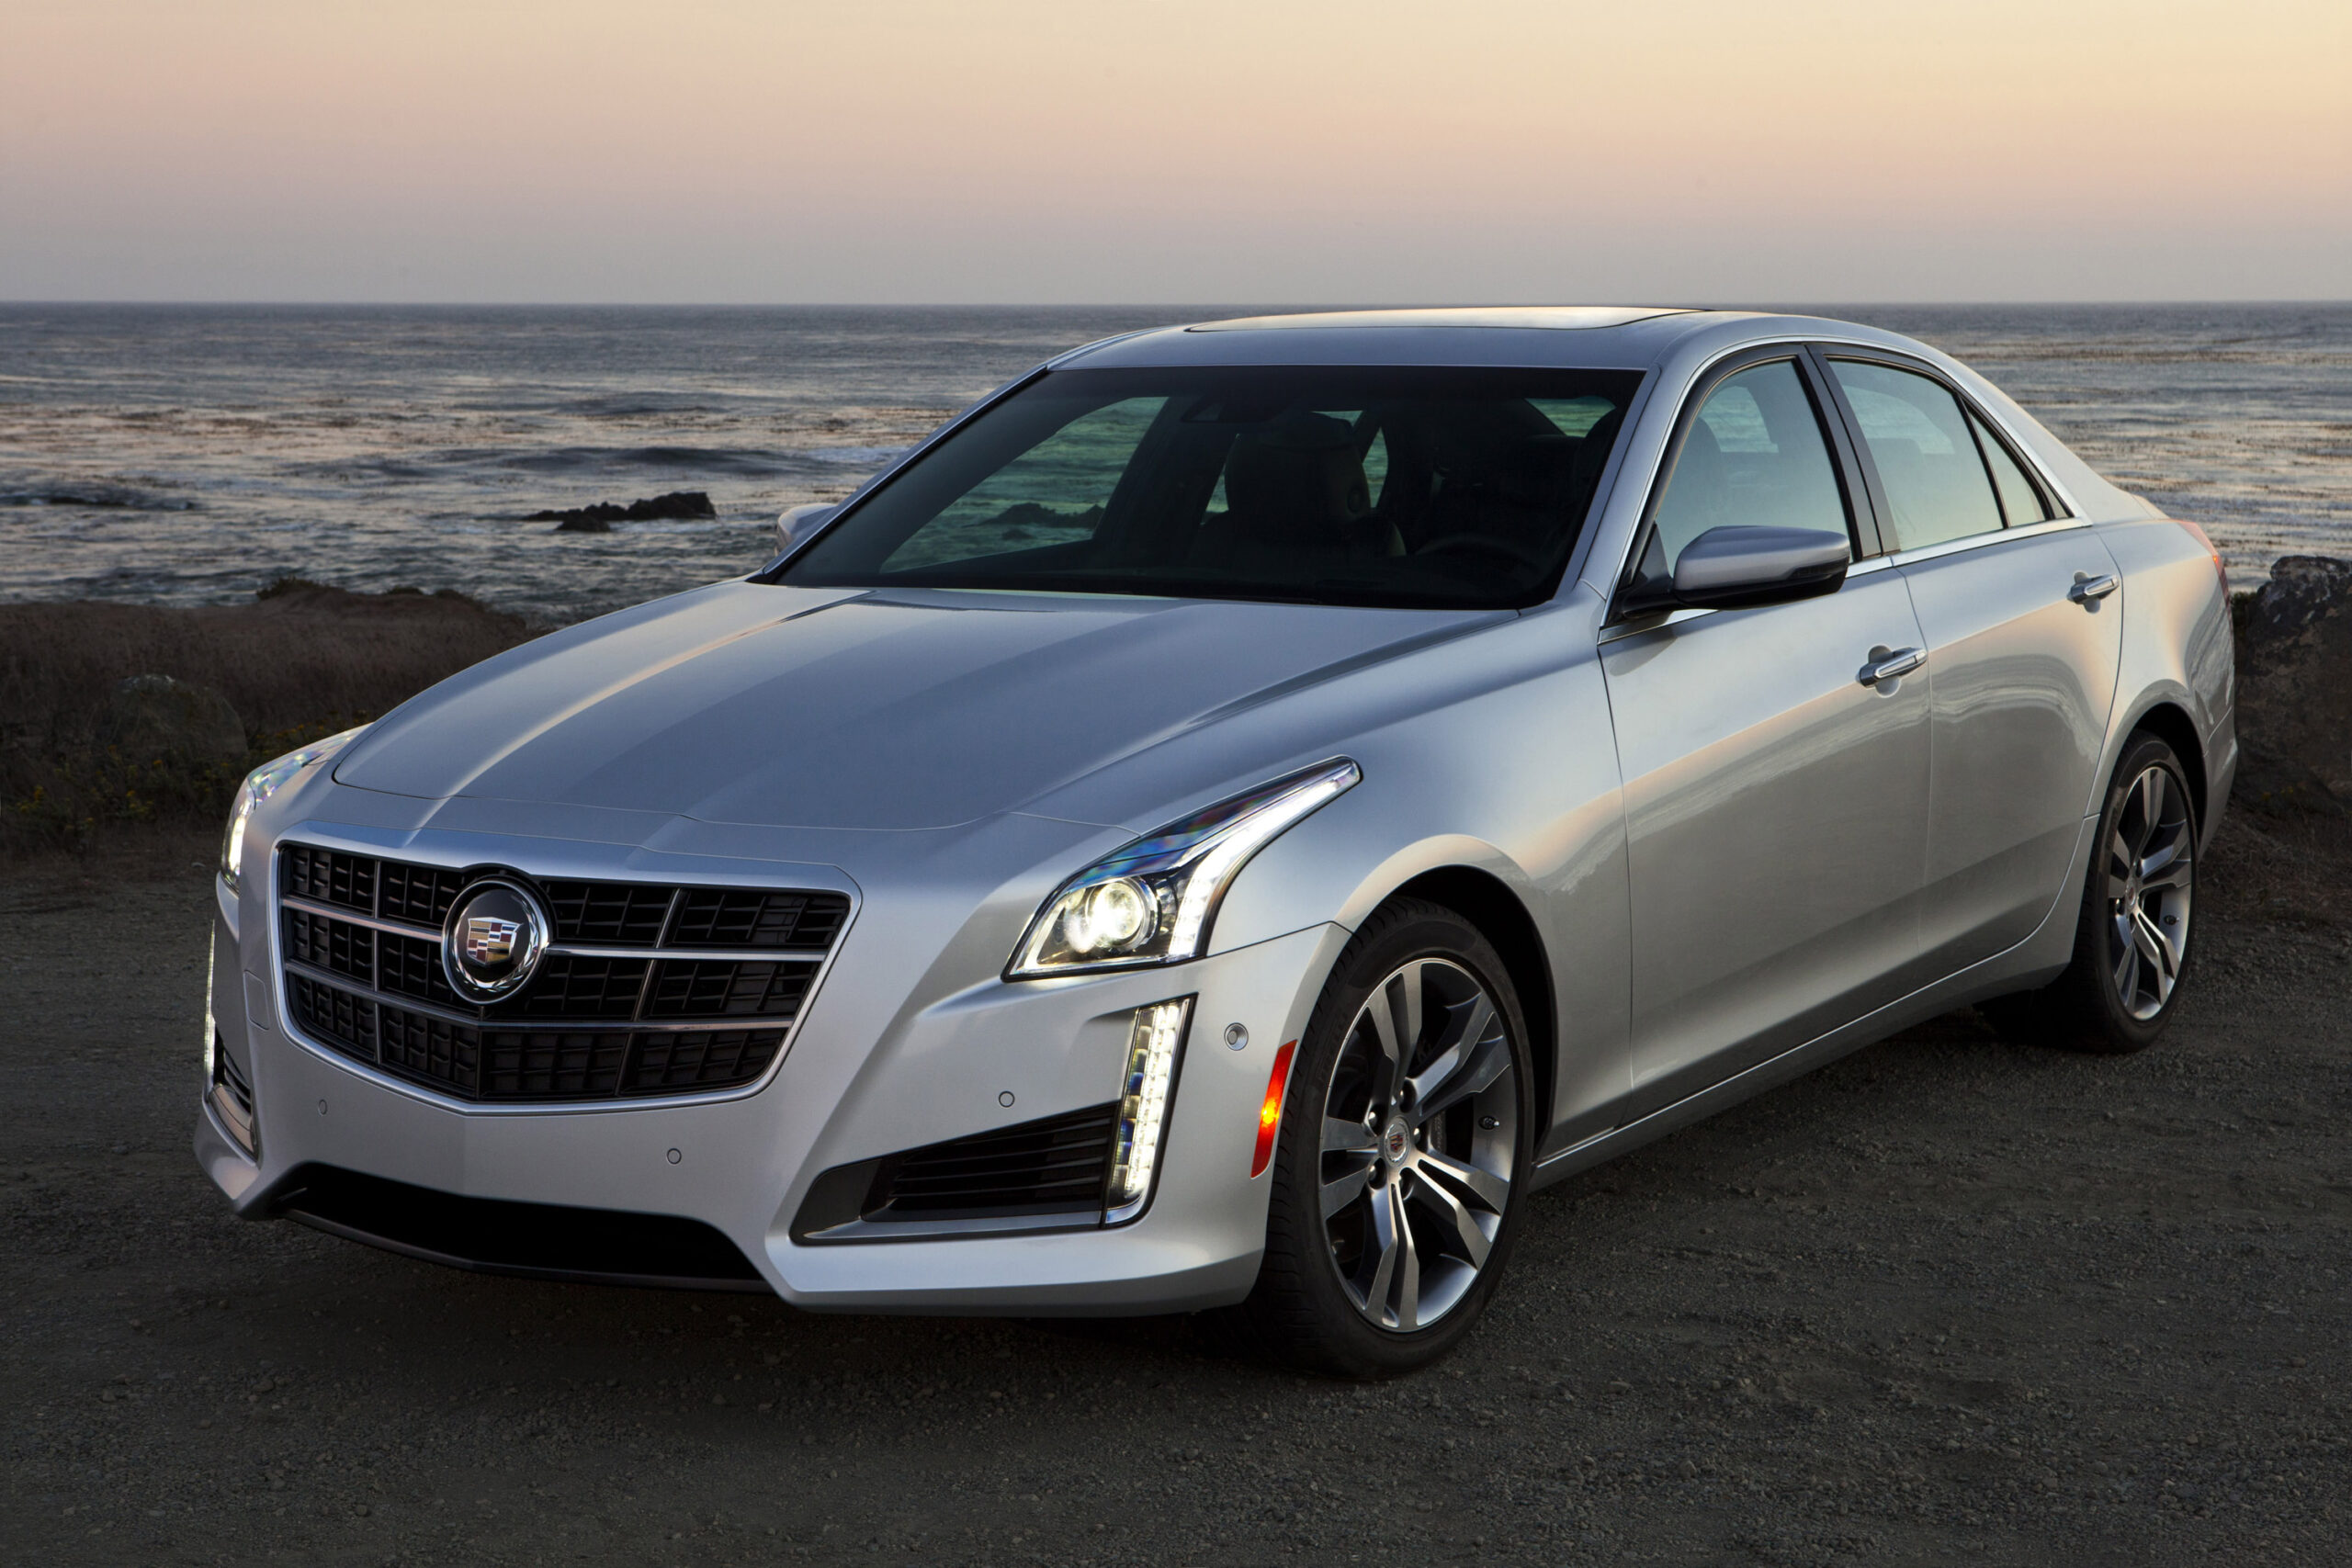 2014-Cadillac-CTS-featured-